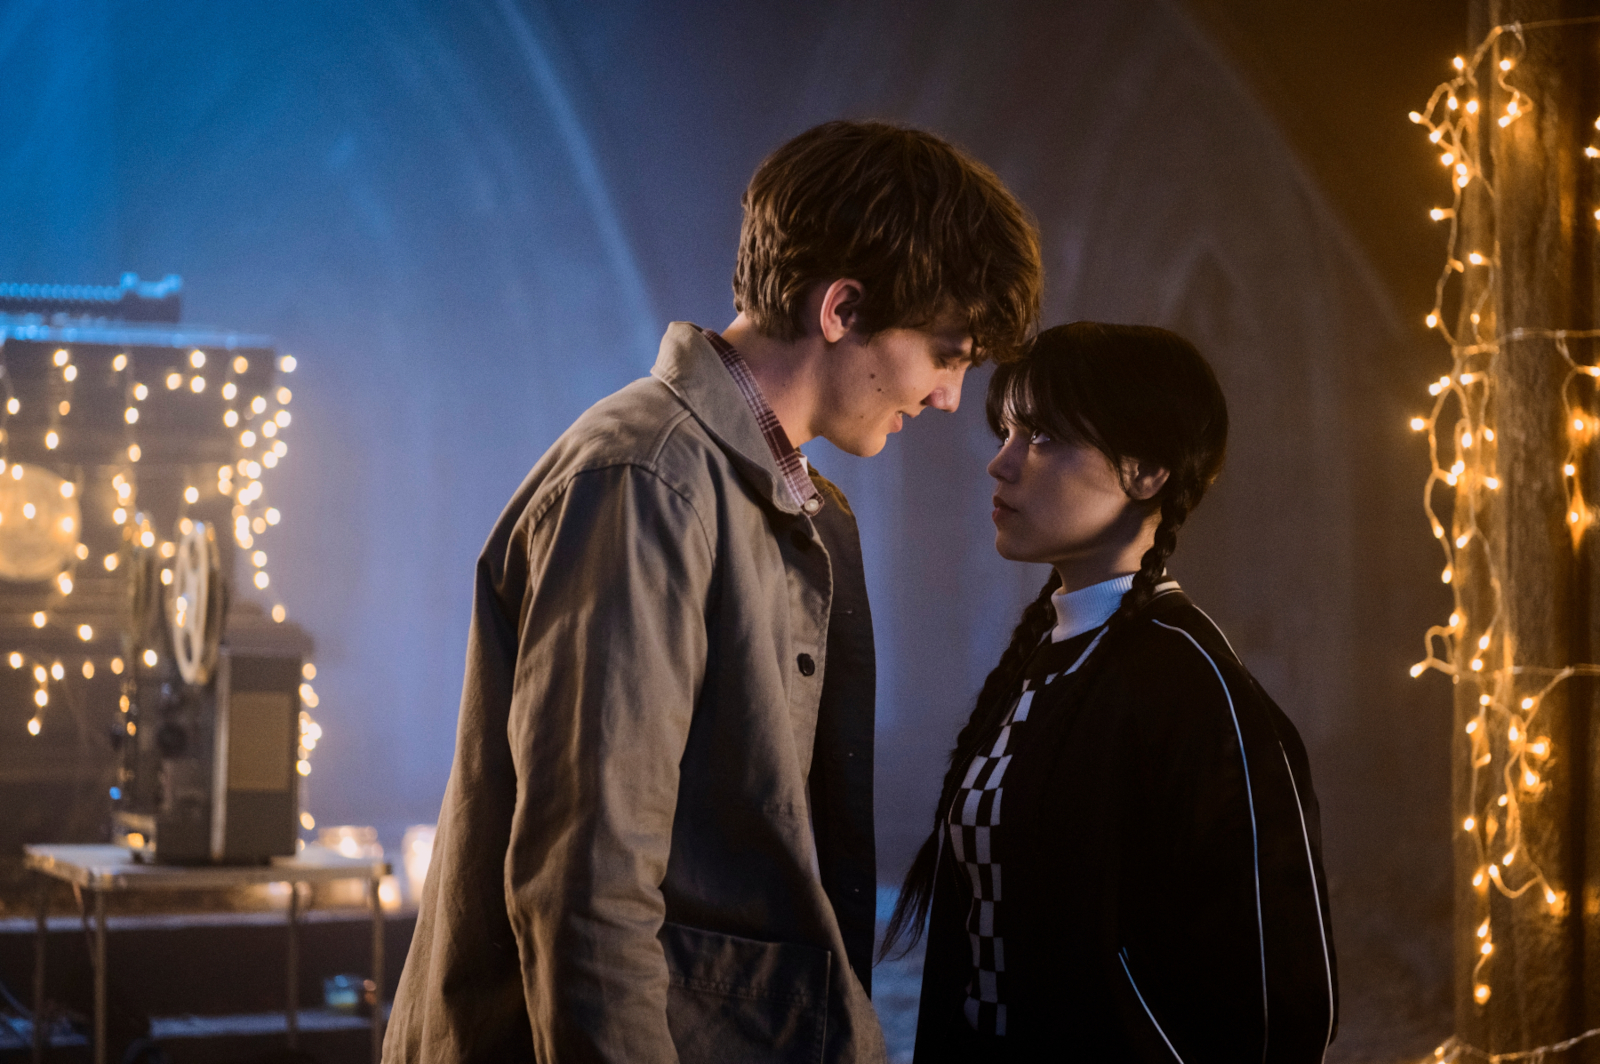 Hunter Doohan and Jenna Ortega in 'Wednesday,' which has been renewed for season 2. The two are looking at one another and about to kiss.